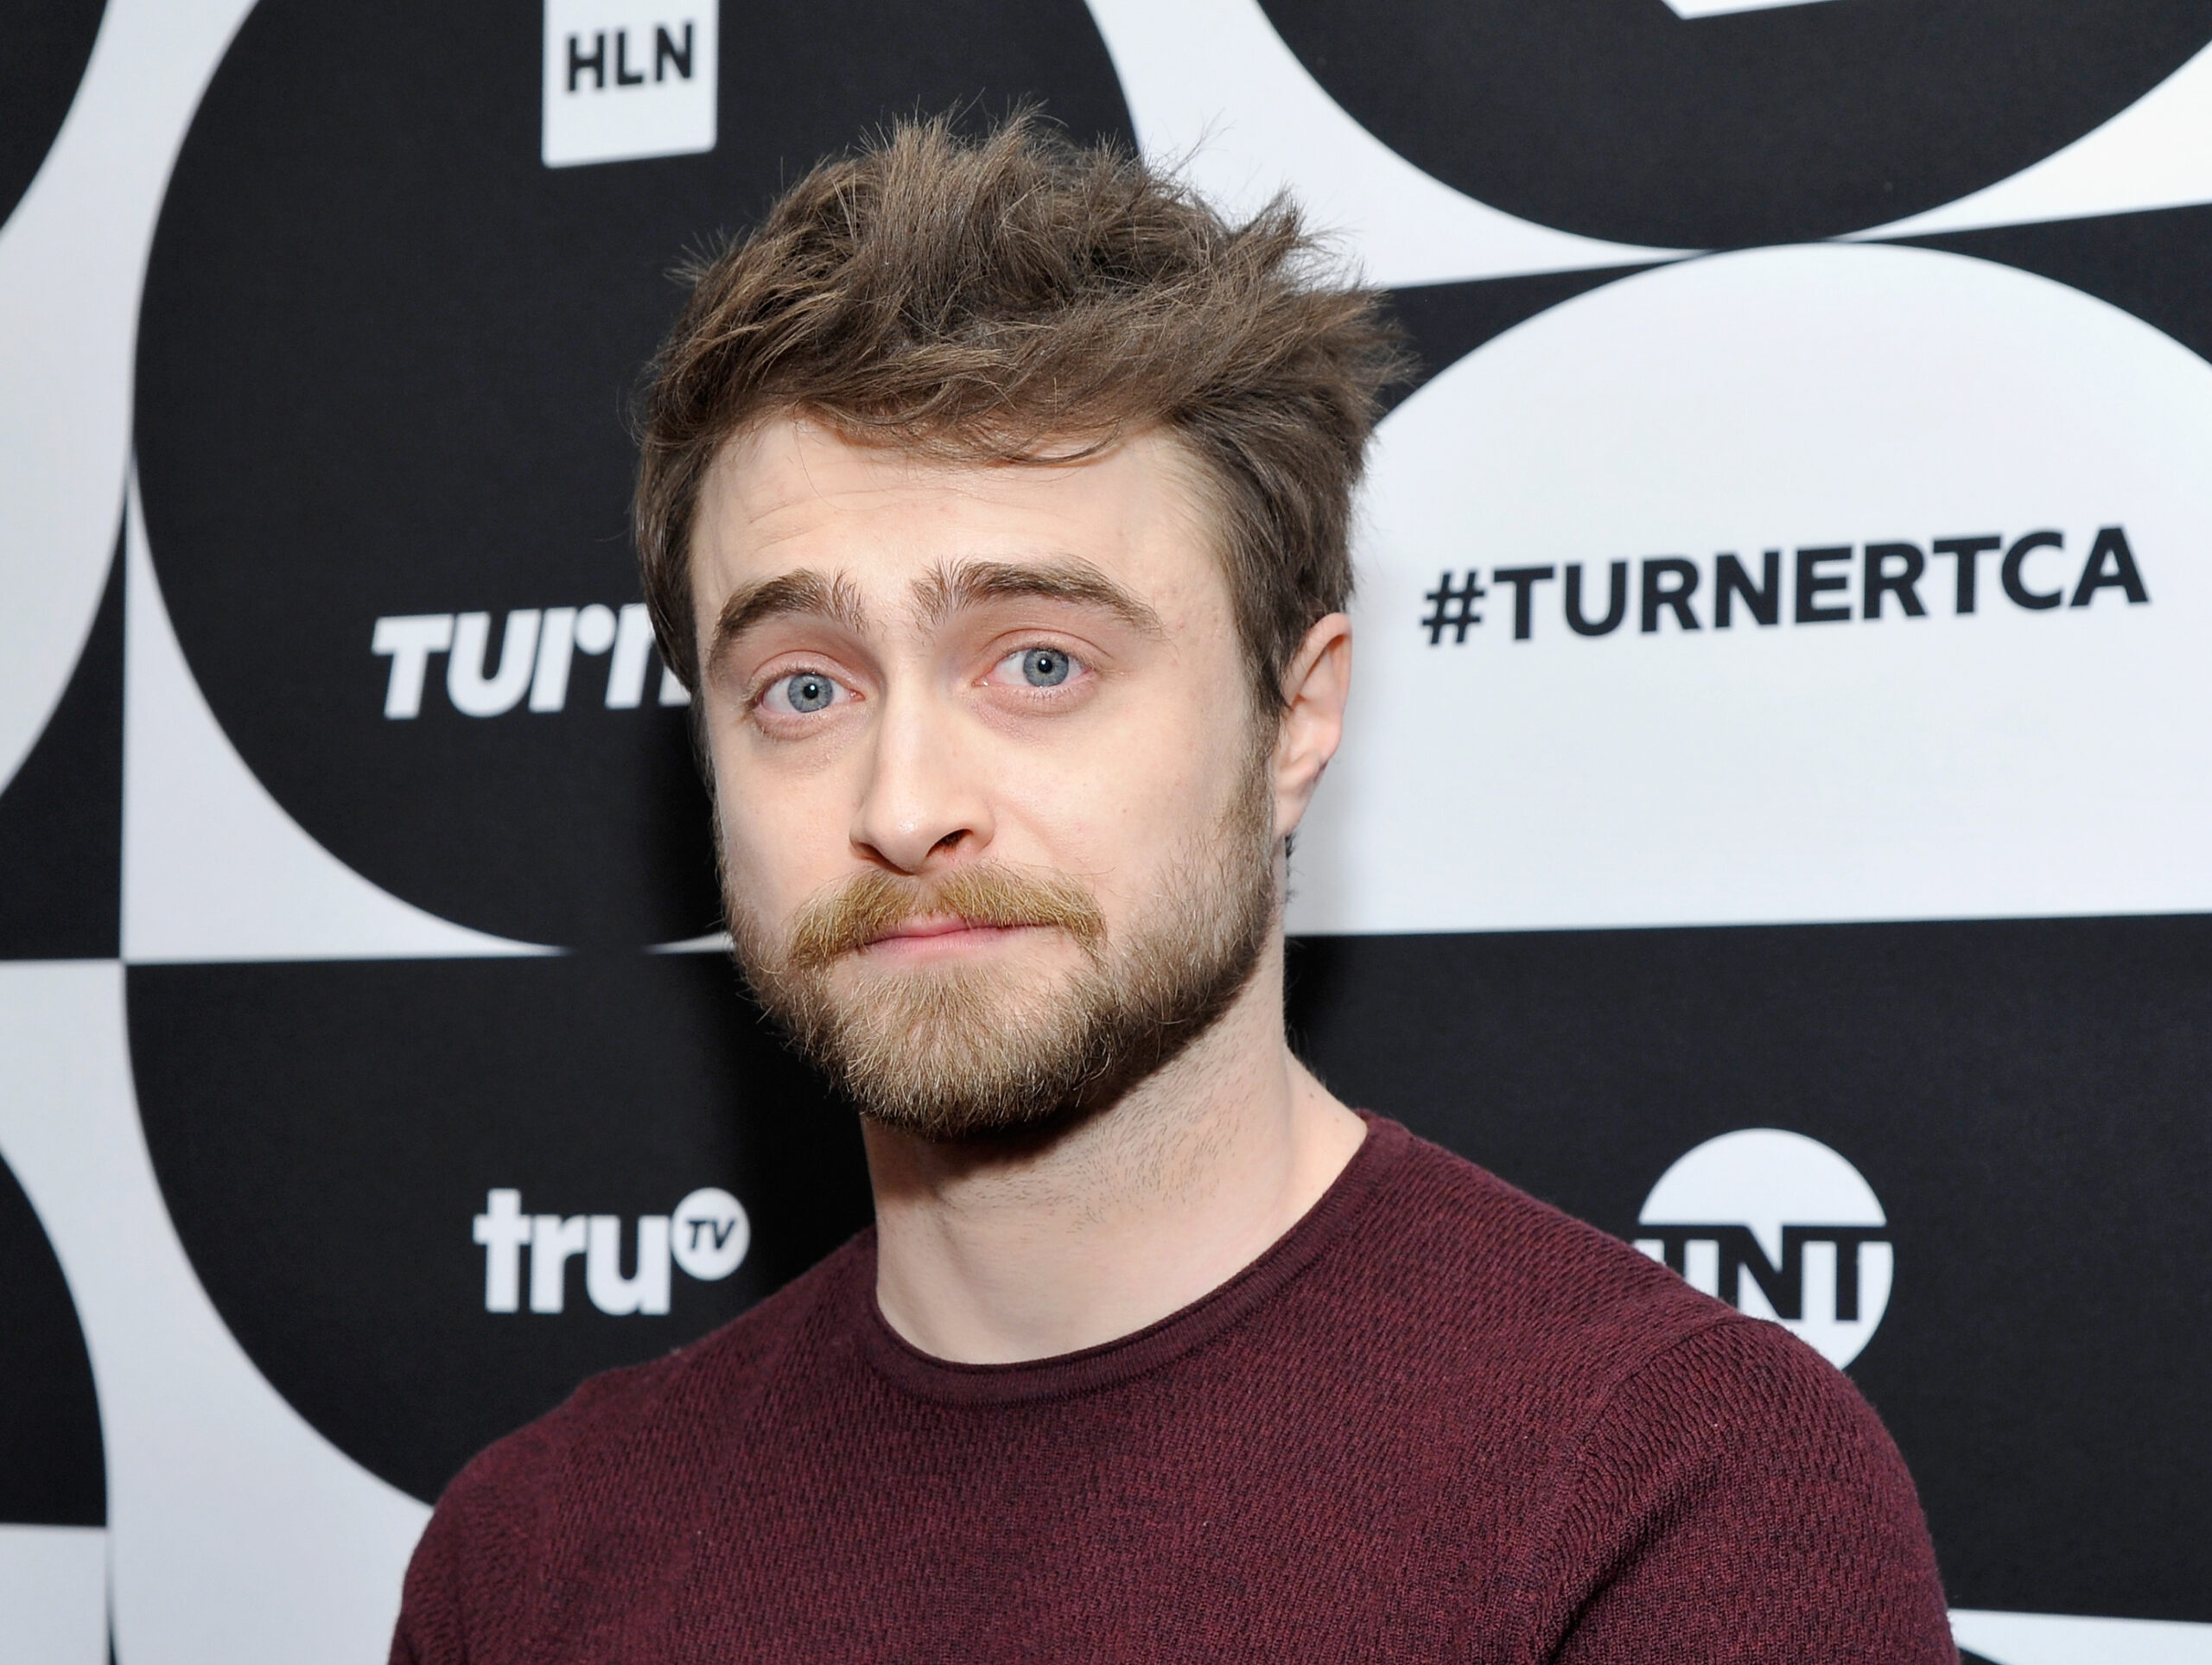 ‘Harry Potter’ Star Daniel Radcliffe Welcomes First Child With Girlfriend